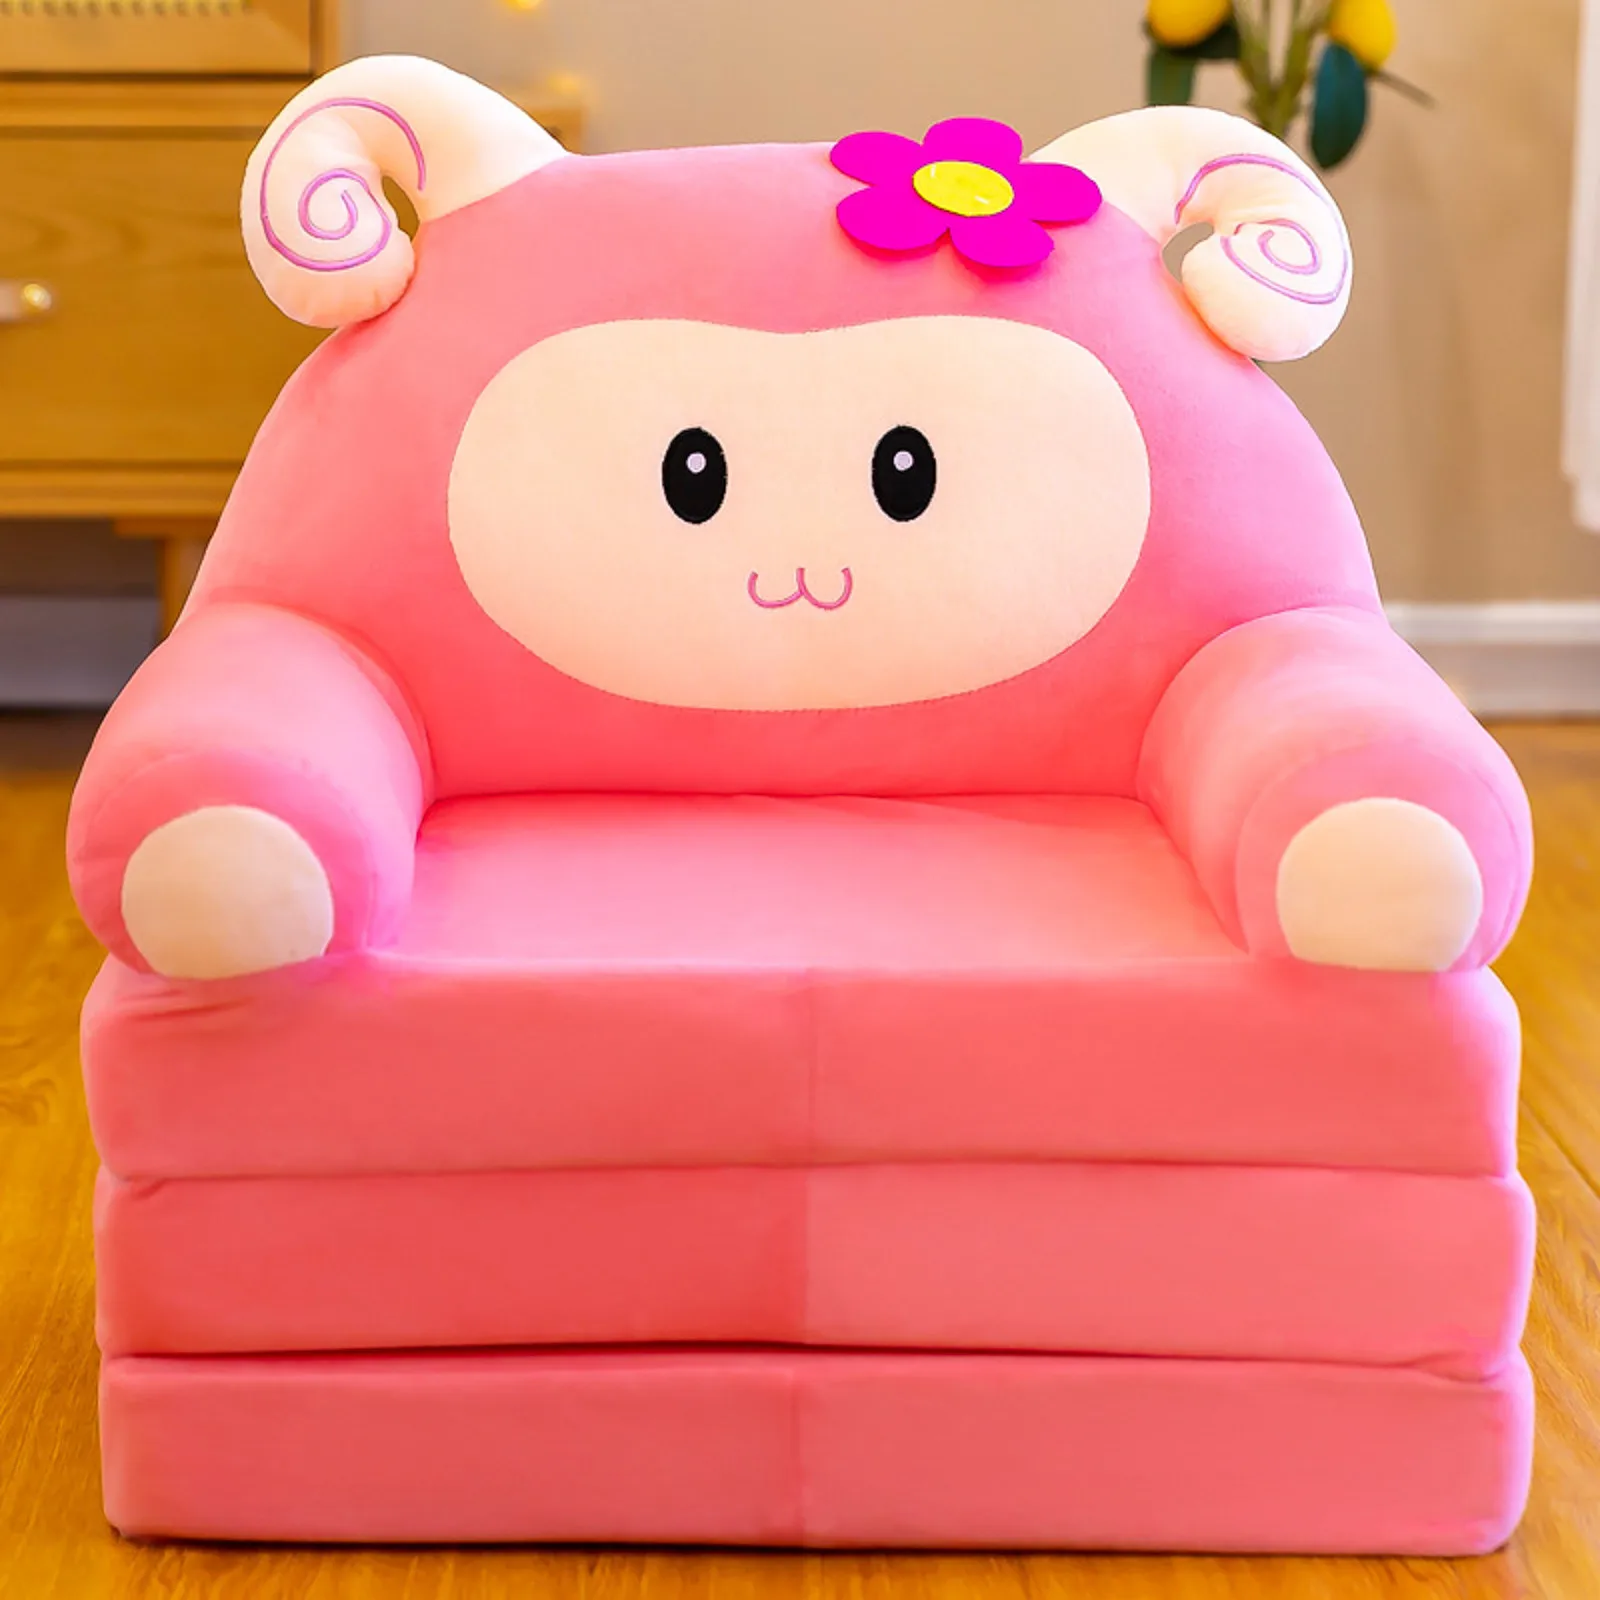 

New Baby Kid Sofa Only Cover No Filling Cartoon Crown Seat Children's Chair Neat Puff Skin Toddler Child Folding Plush Sofa Bed